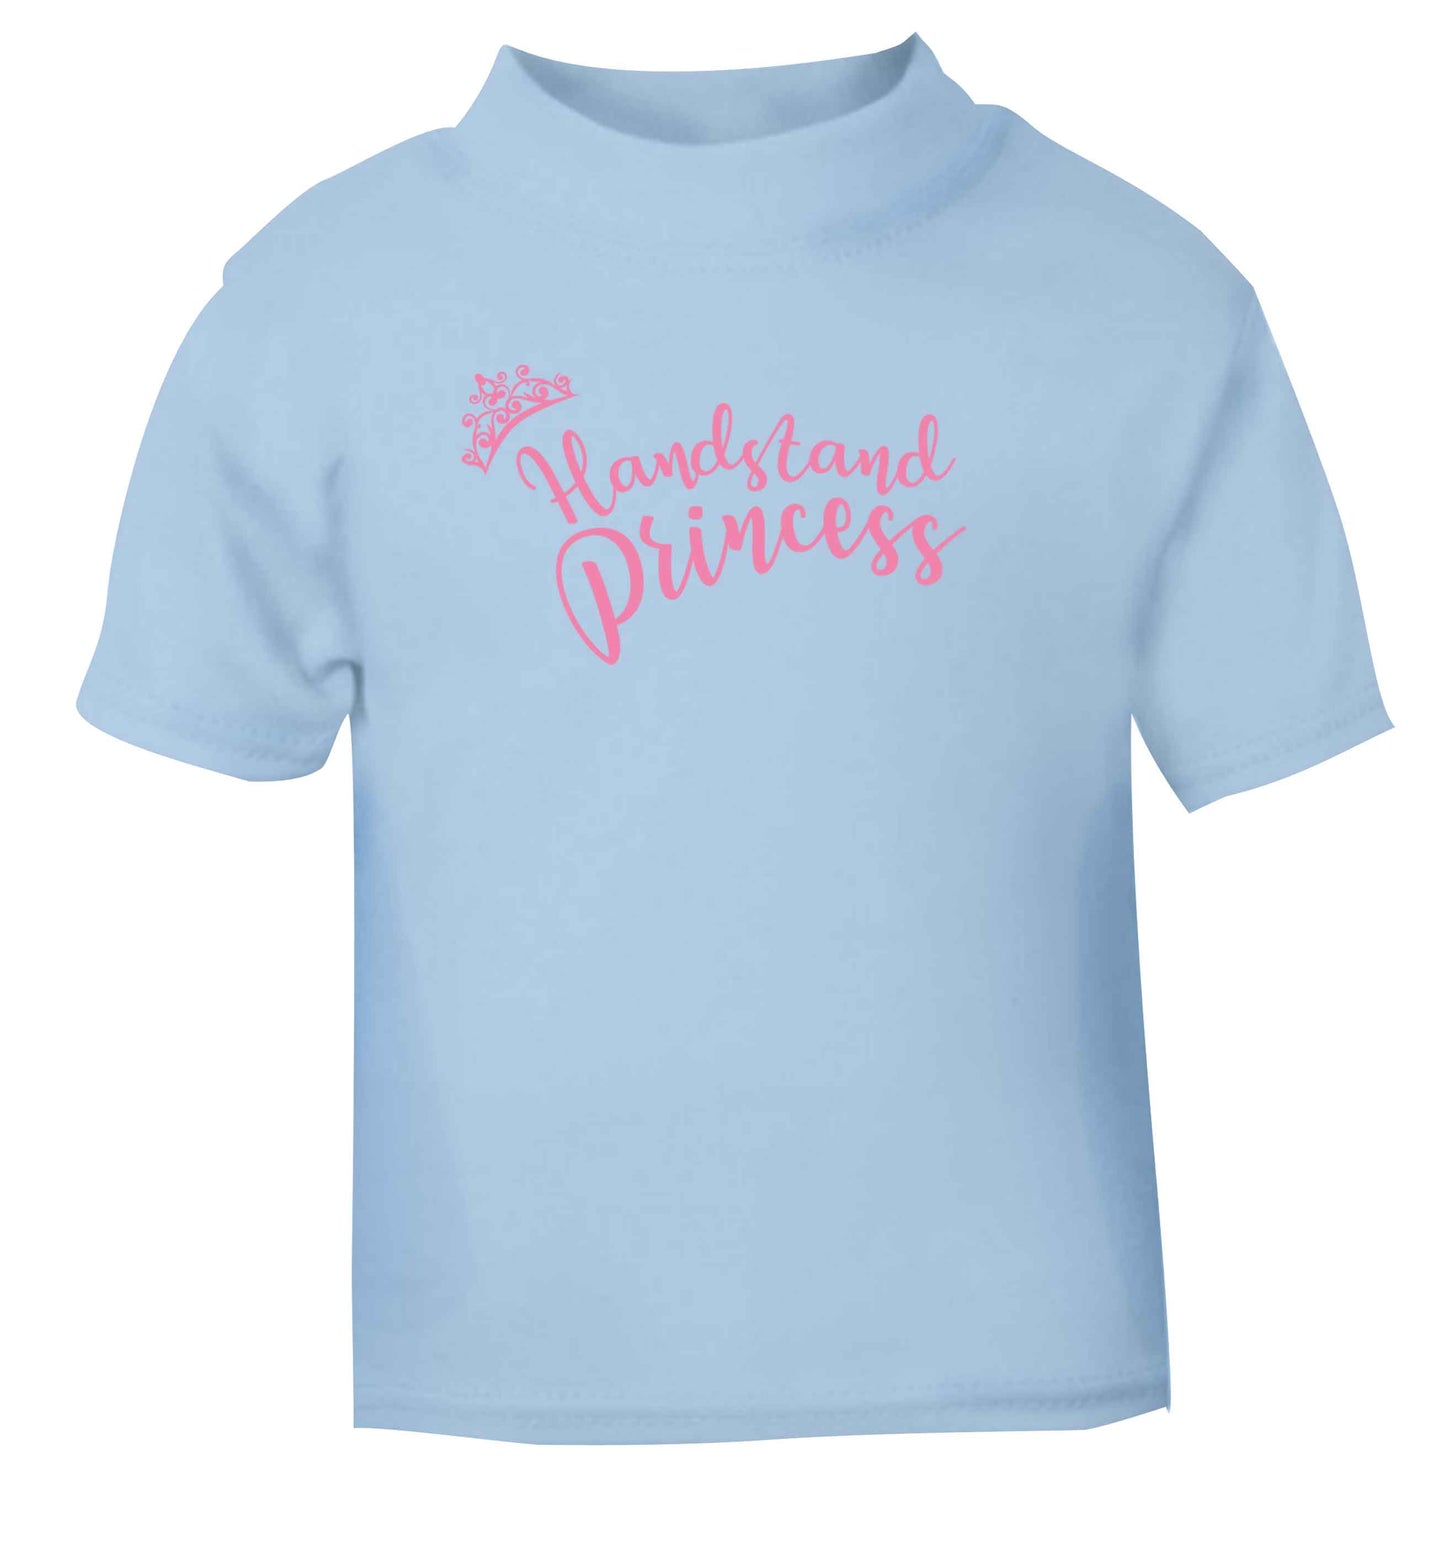 Handstand princess light blue Baby Toddler Tshirt 2 Years